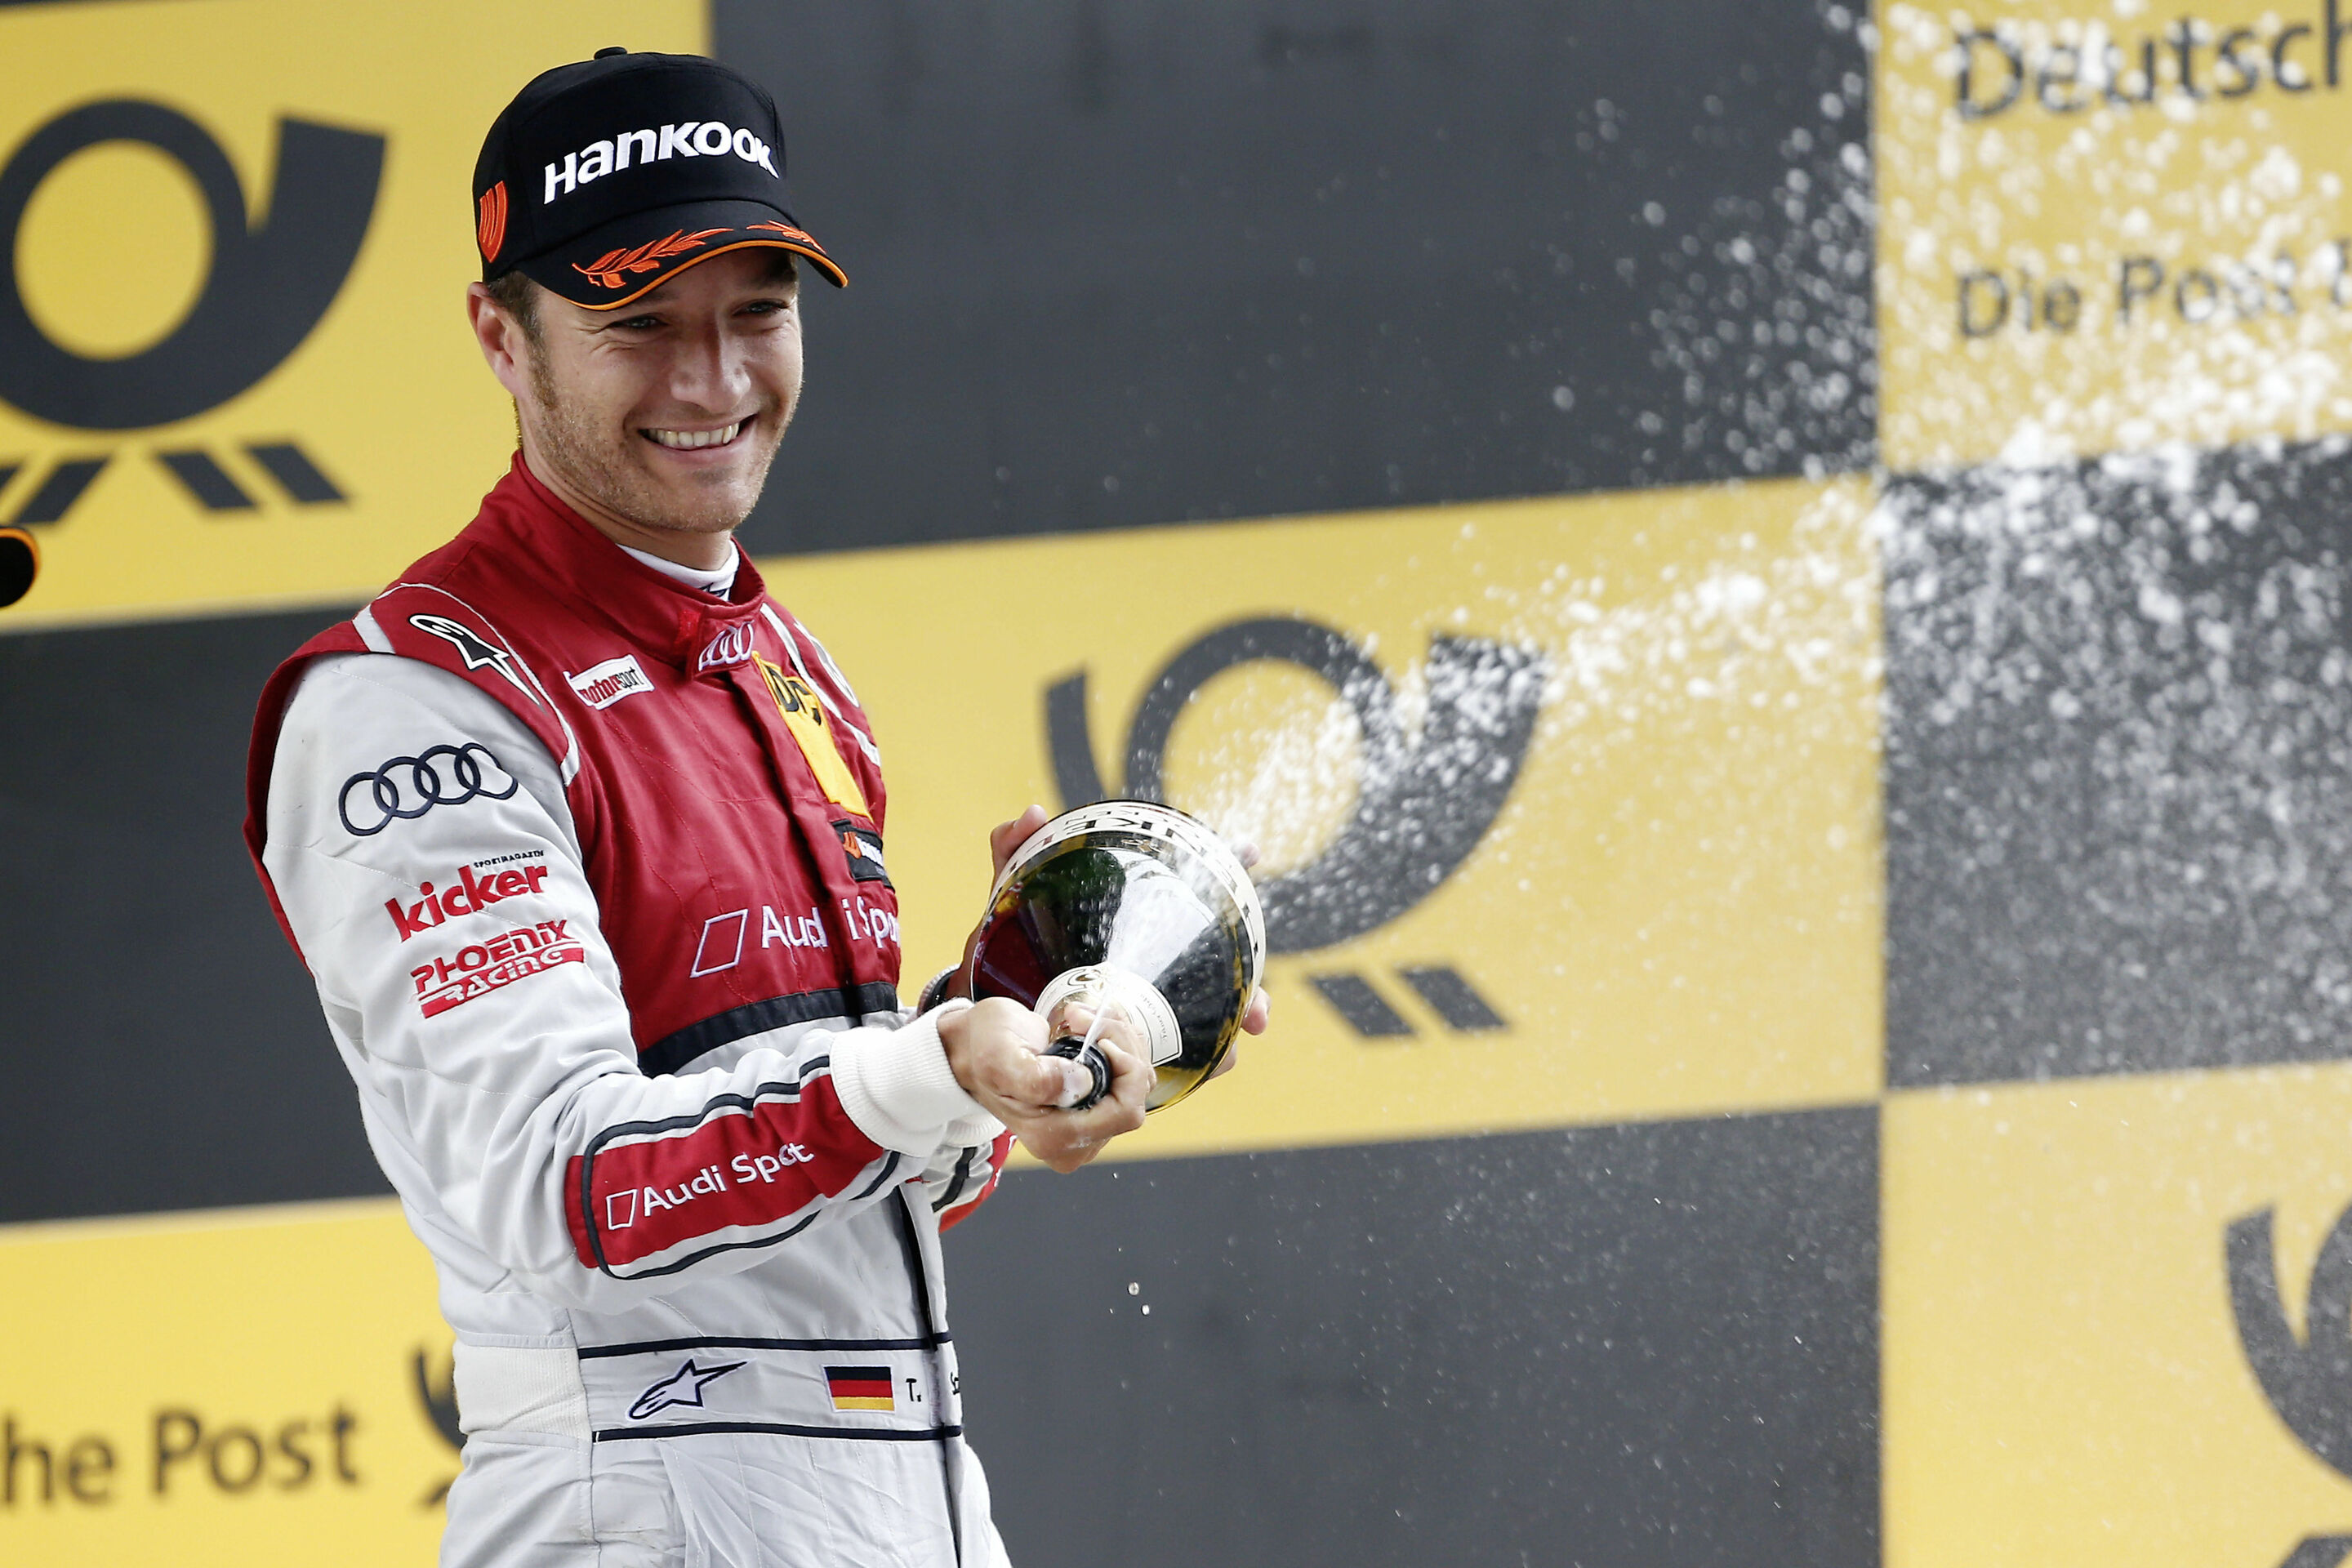 Timo Scheider clinches third place for Audi